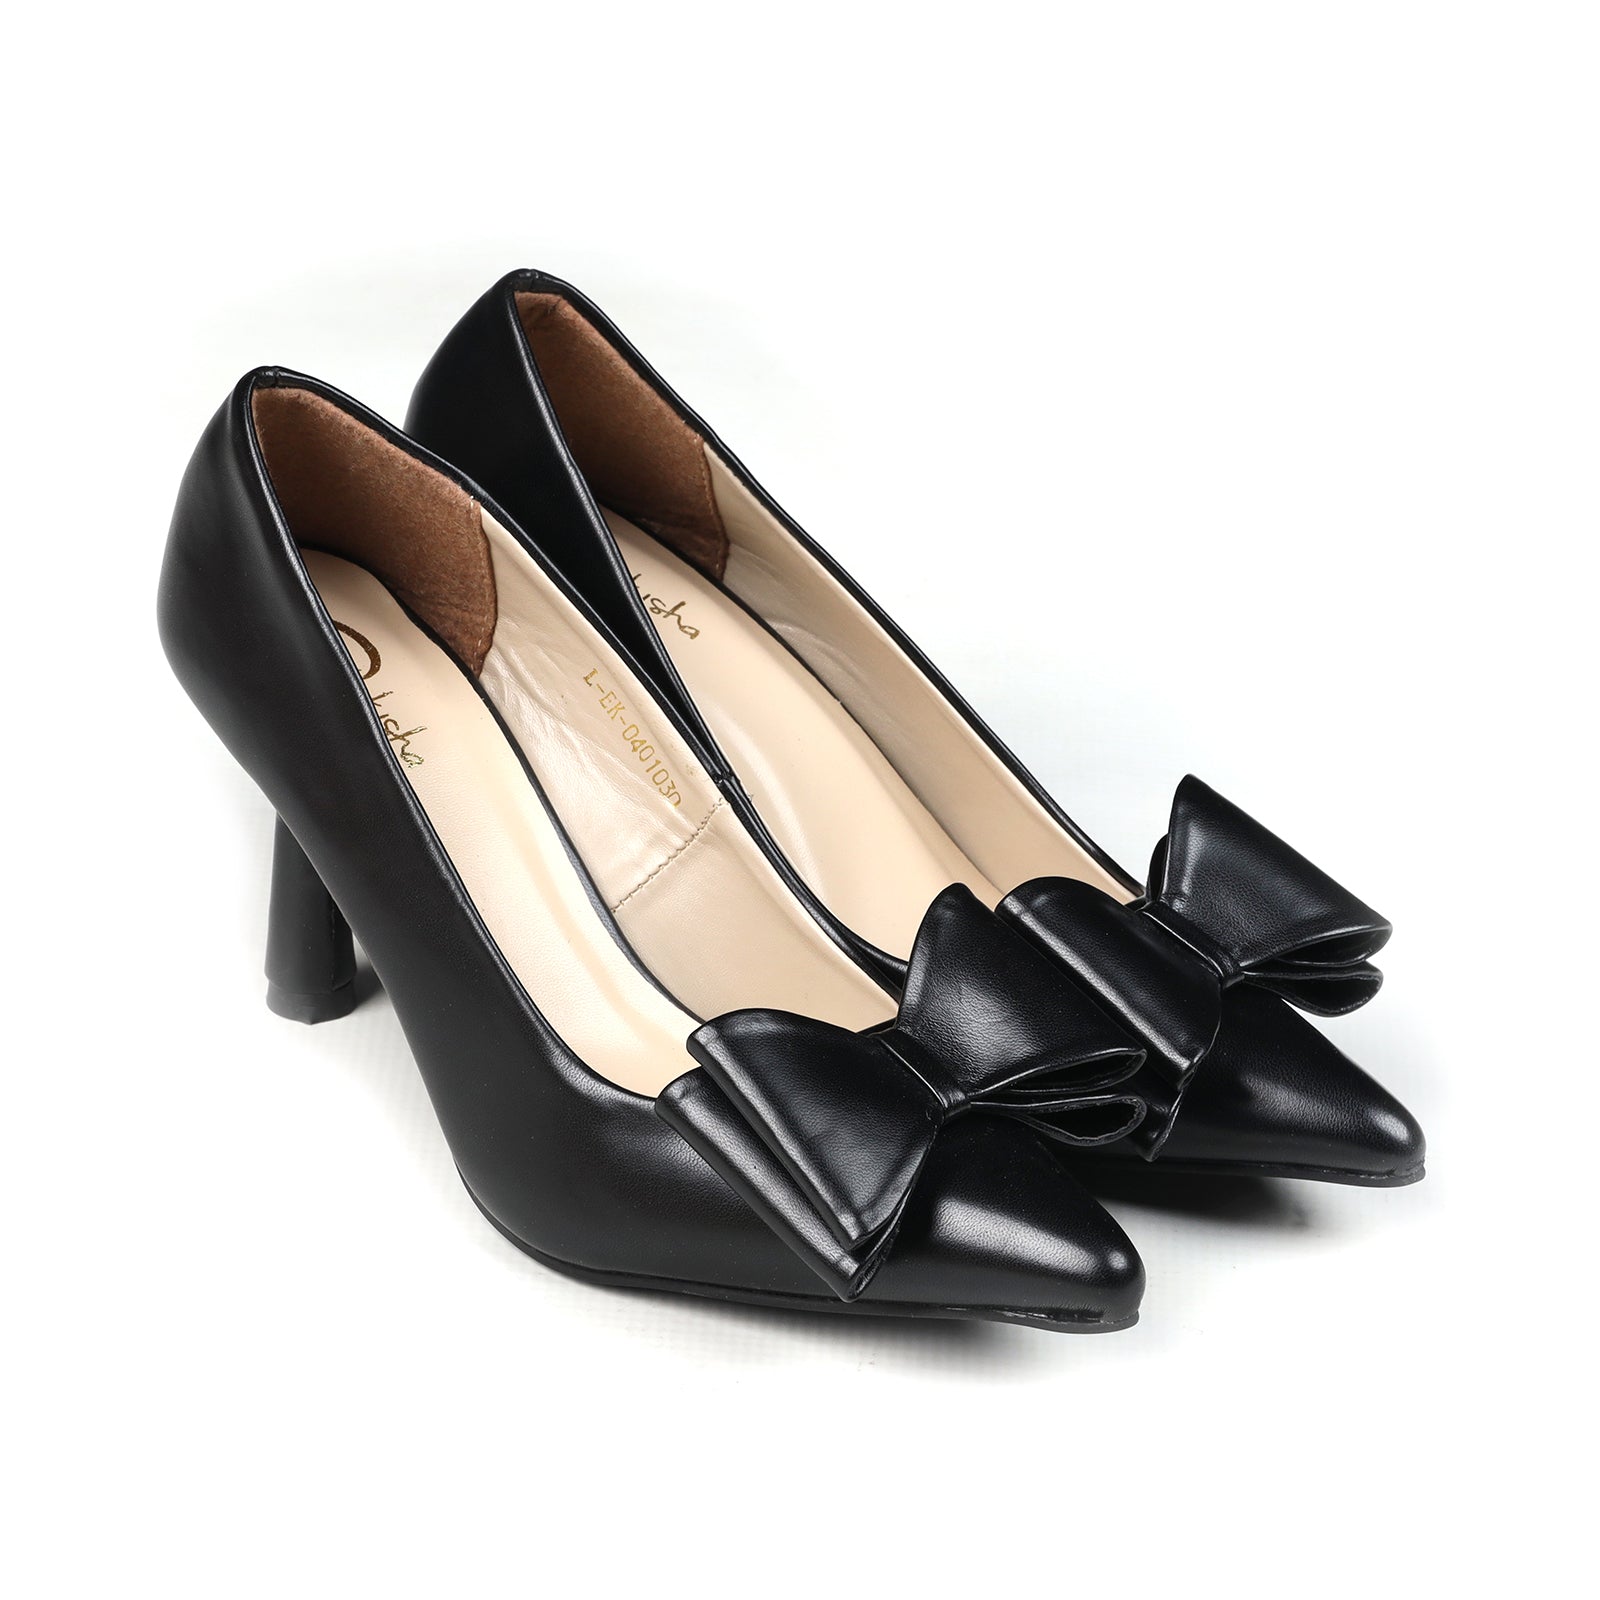 Buy commander shoes High Heel Pumps for Girls and Women (528 Black 3UK) at  Amazon.in